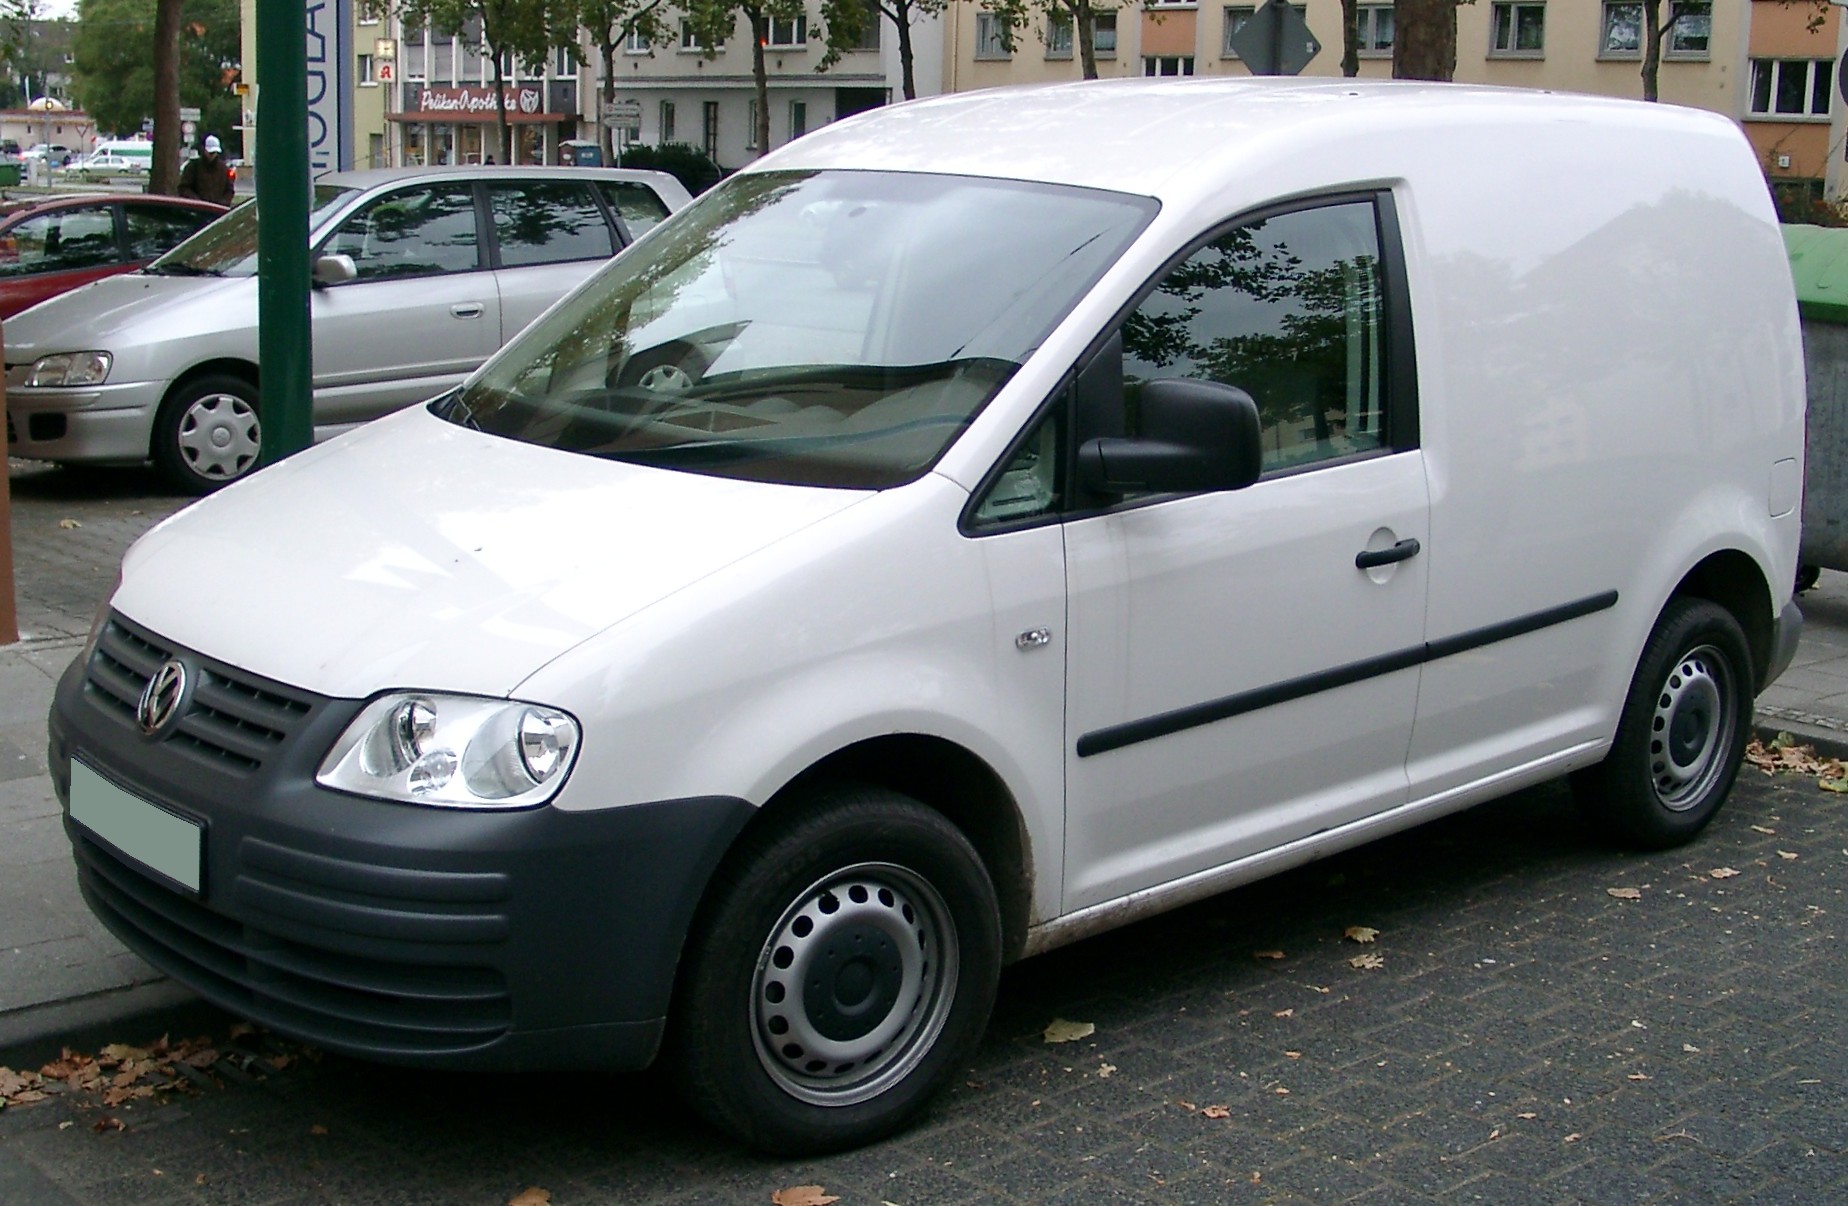 VW Caddy front 20071026